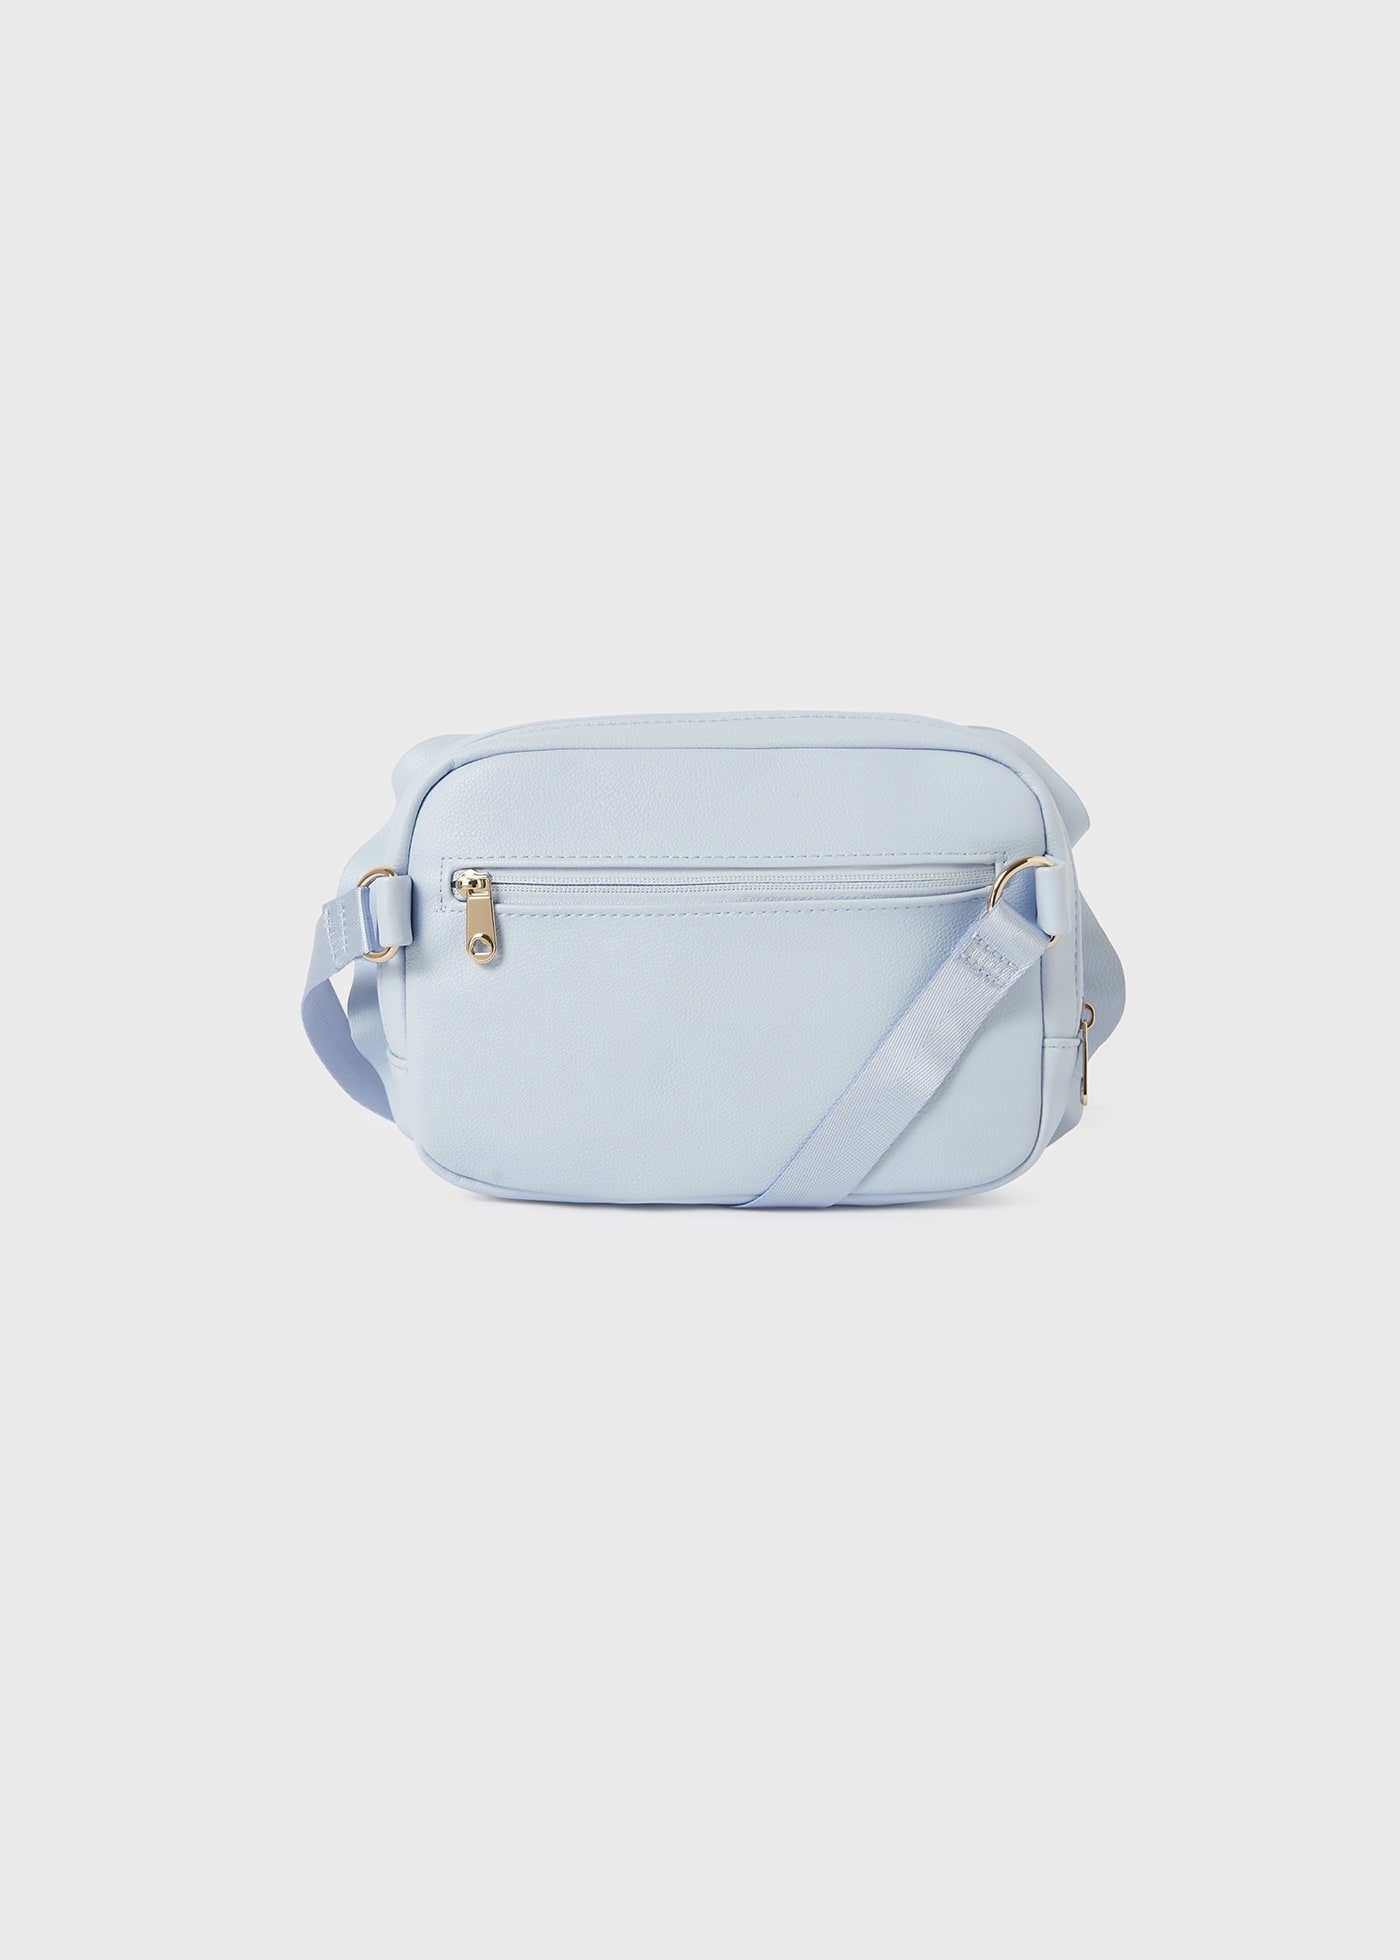 Baby fanny pack